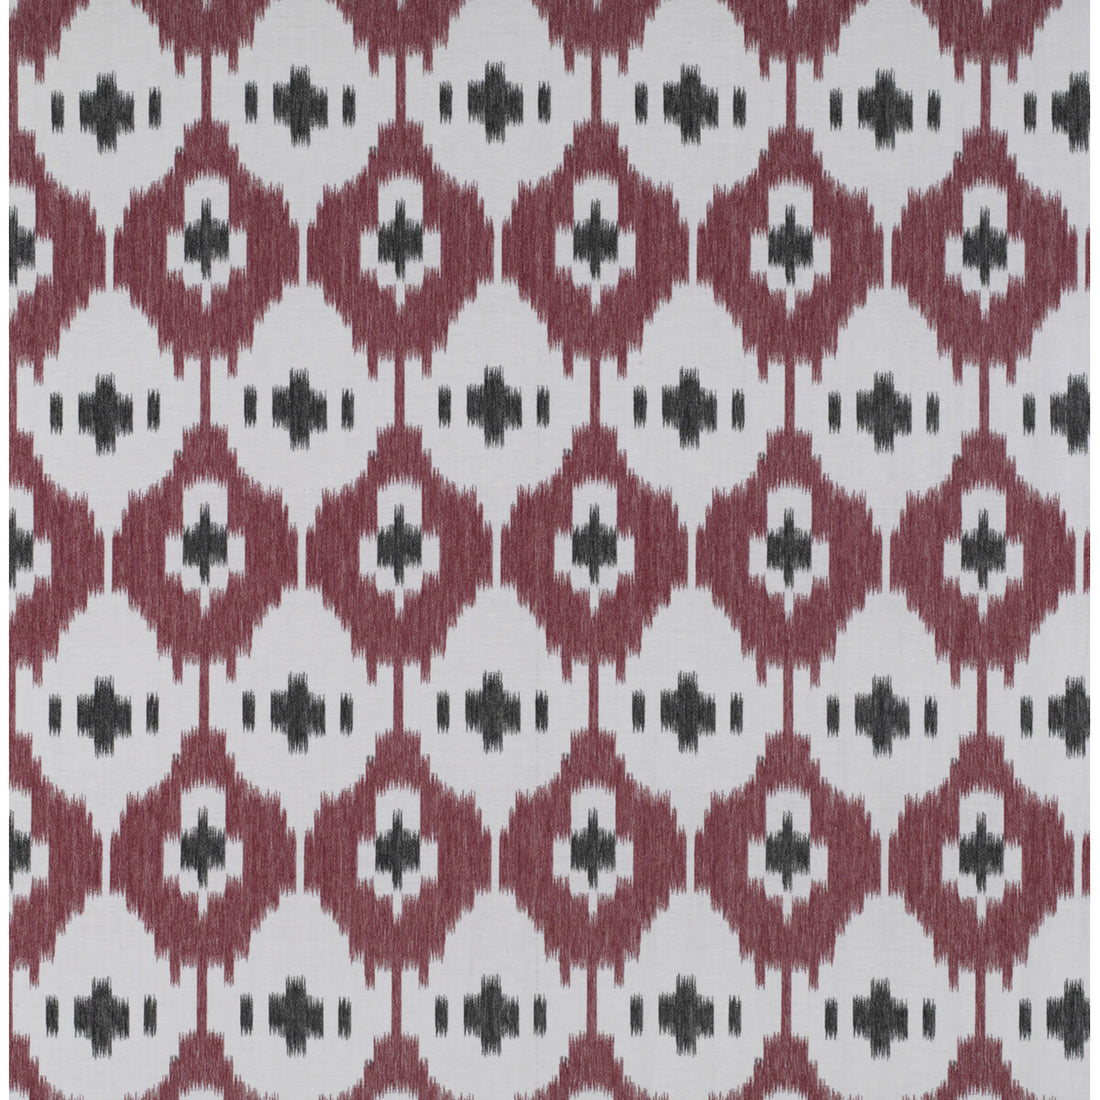 Panarea fabric in rojo/onyx color - pattern GDT5315.004.0 - by Gaston y Daniela in the Tierras collection